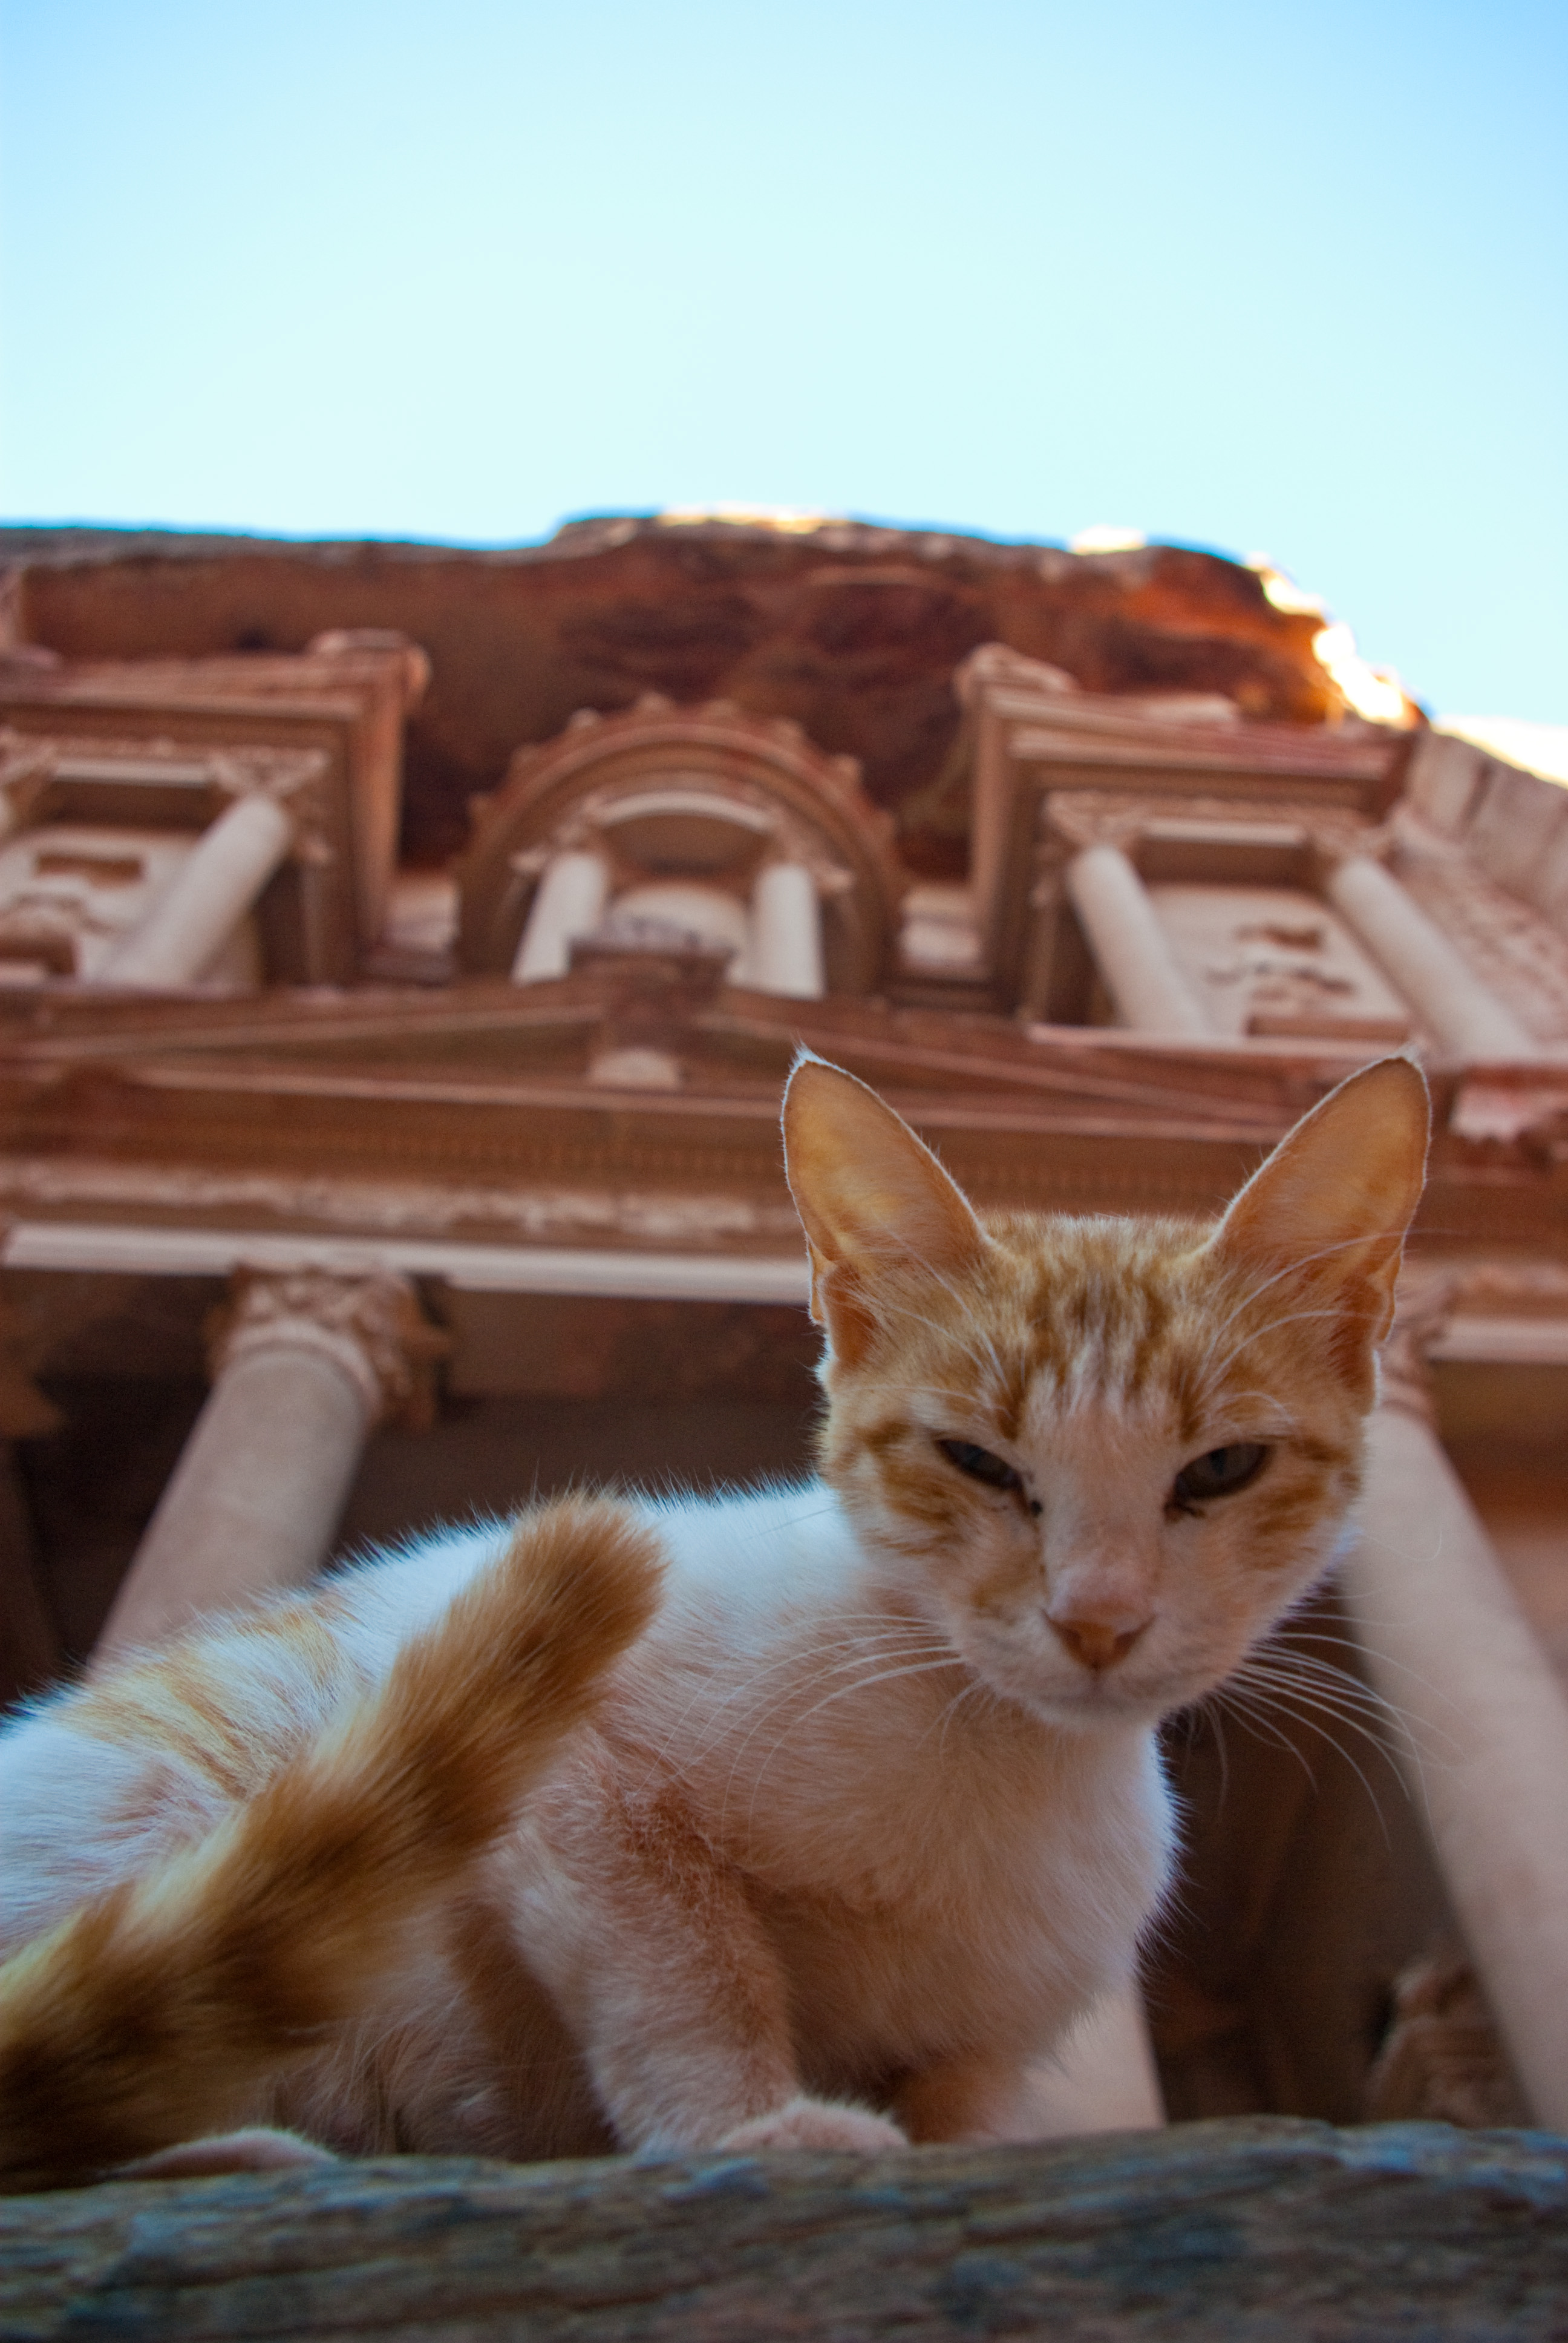 Close-up photo of a cat with the edifice of Petra looming behind it.